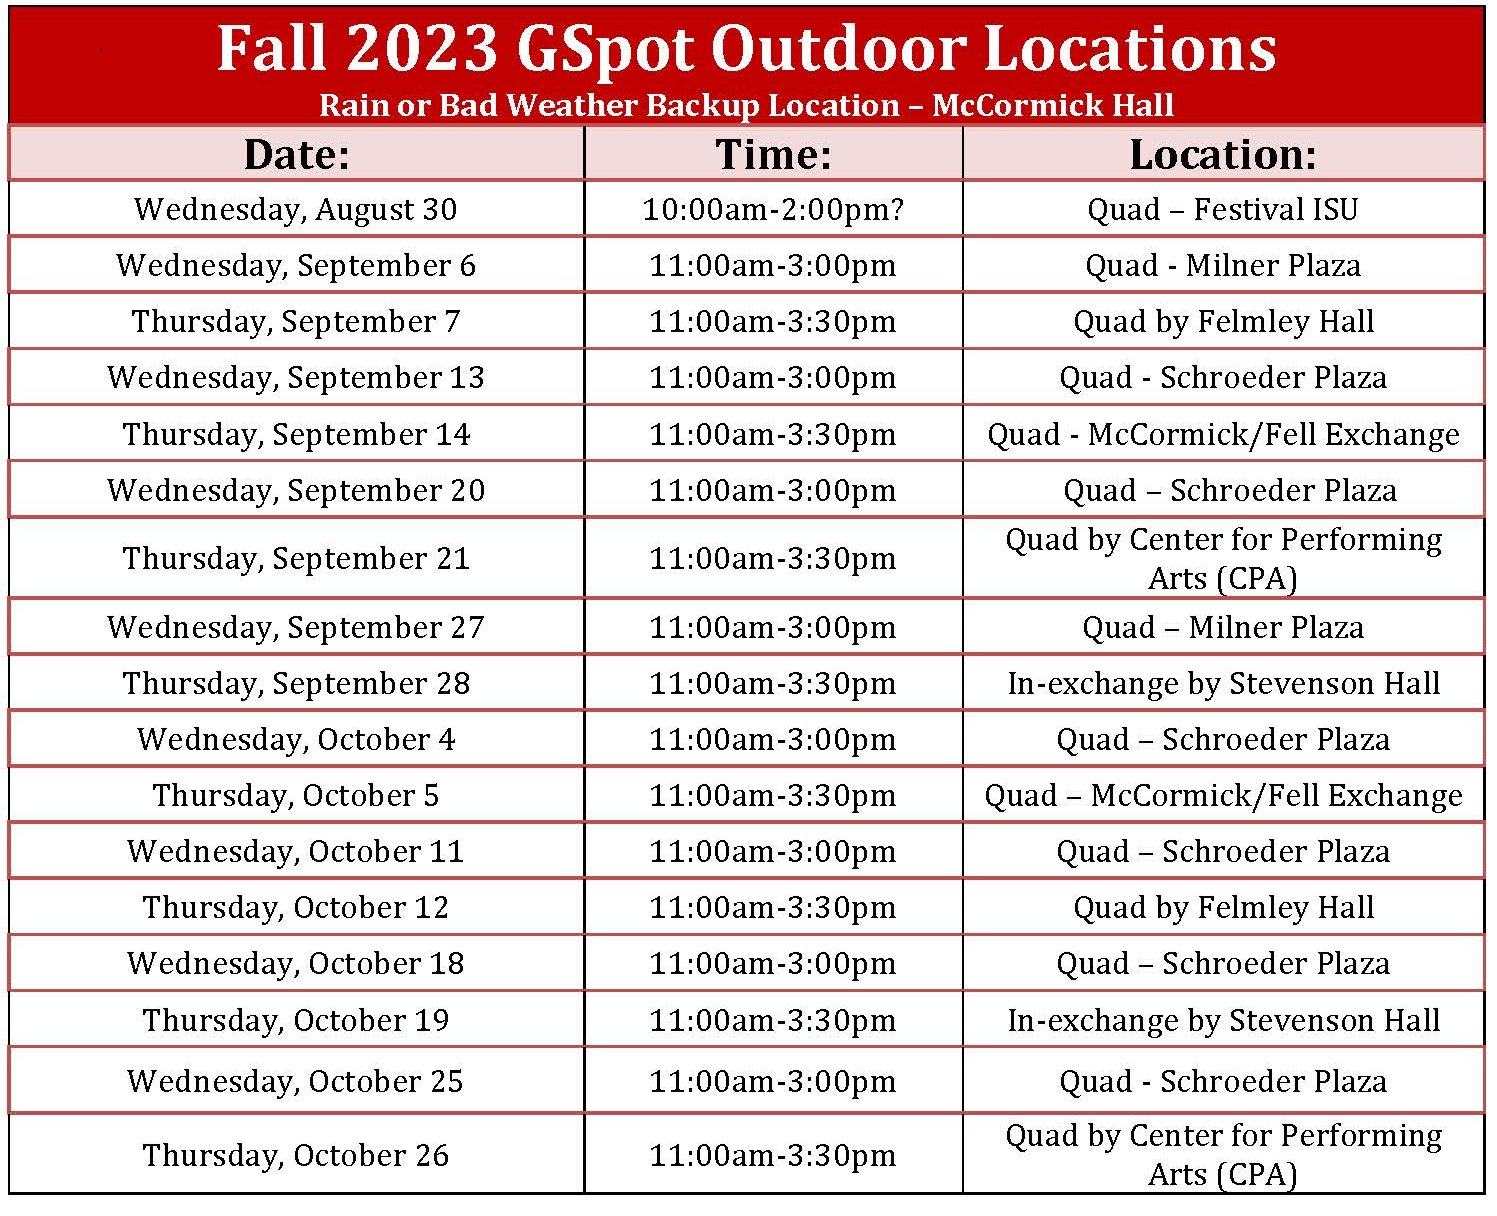 GSpot Dates and Locations